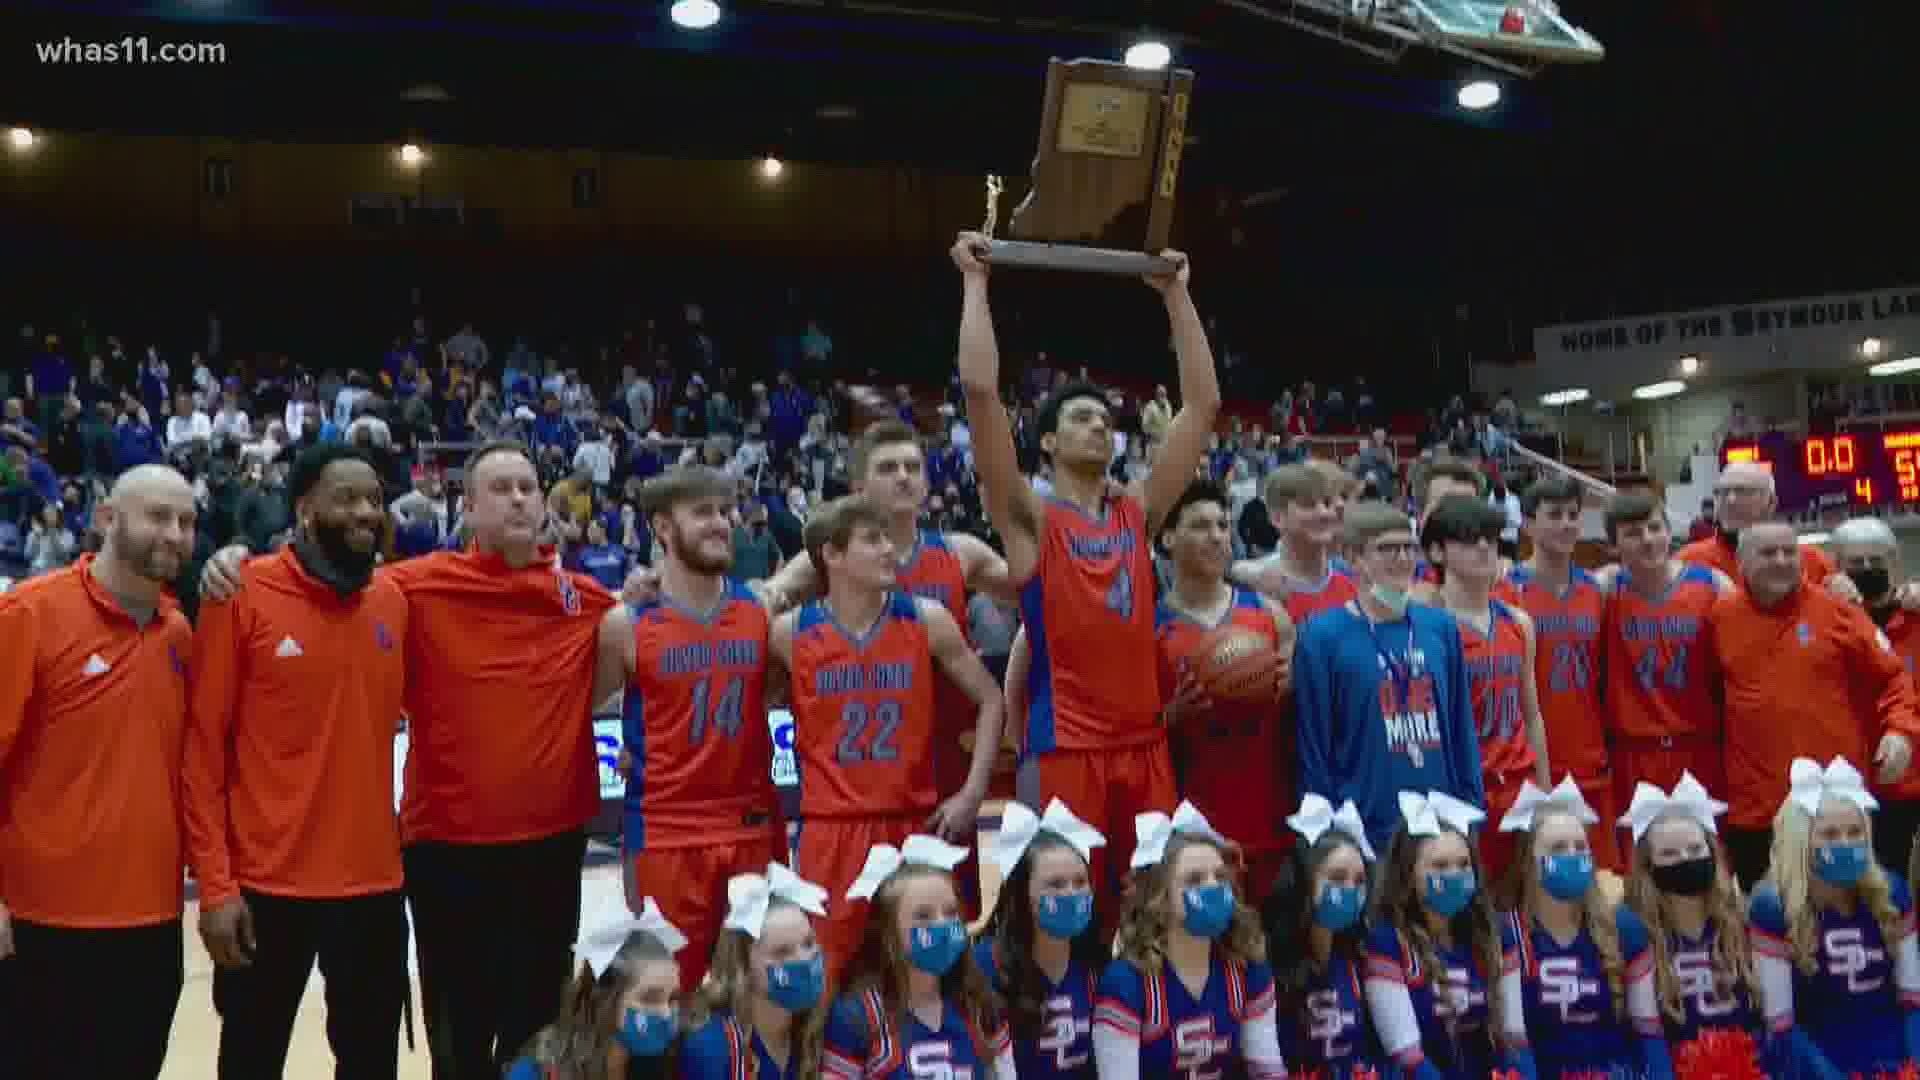 The Dragons beat Guerin Catholic 54-46 to go back to the state final.